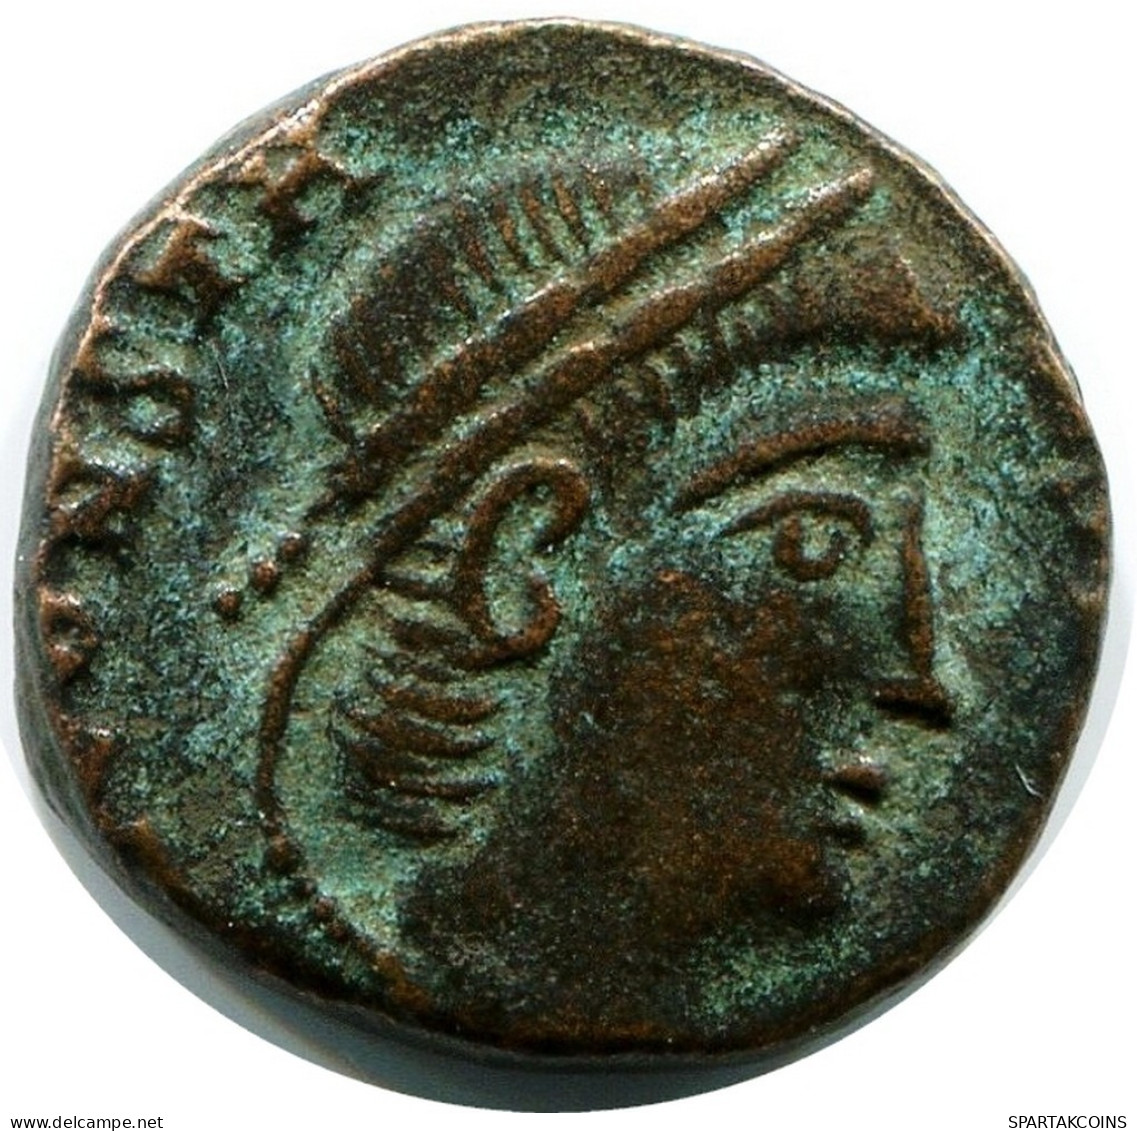 CONSTANS MINTED IN CYZICUS FOUND IN IHNASYAH HOARD EGYPT #ANC11679.14.E.A - El Imperio Christiano (307 / 363)